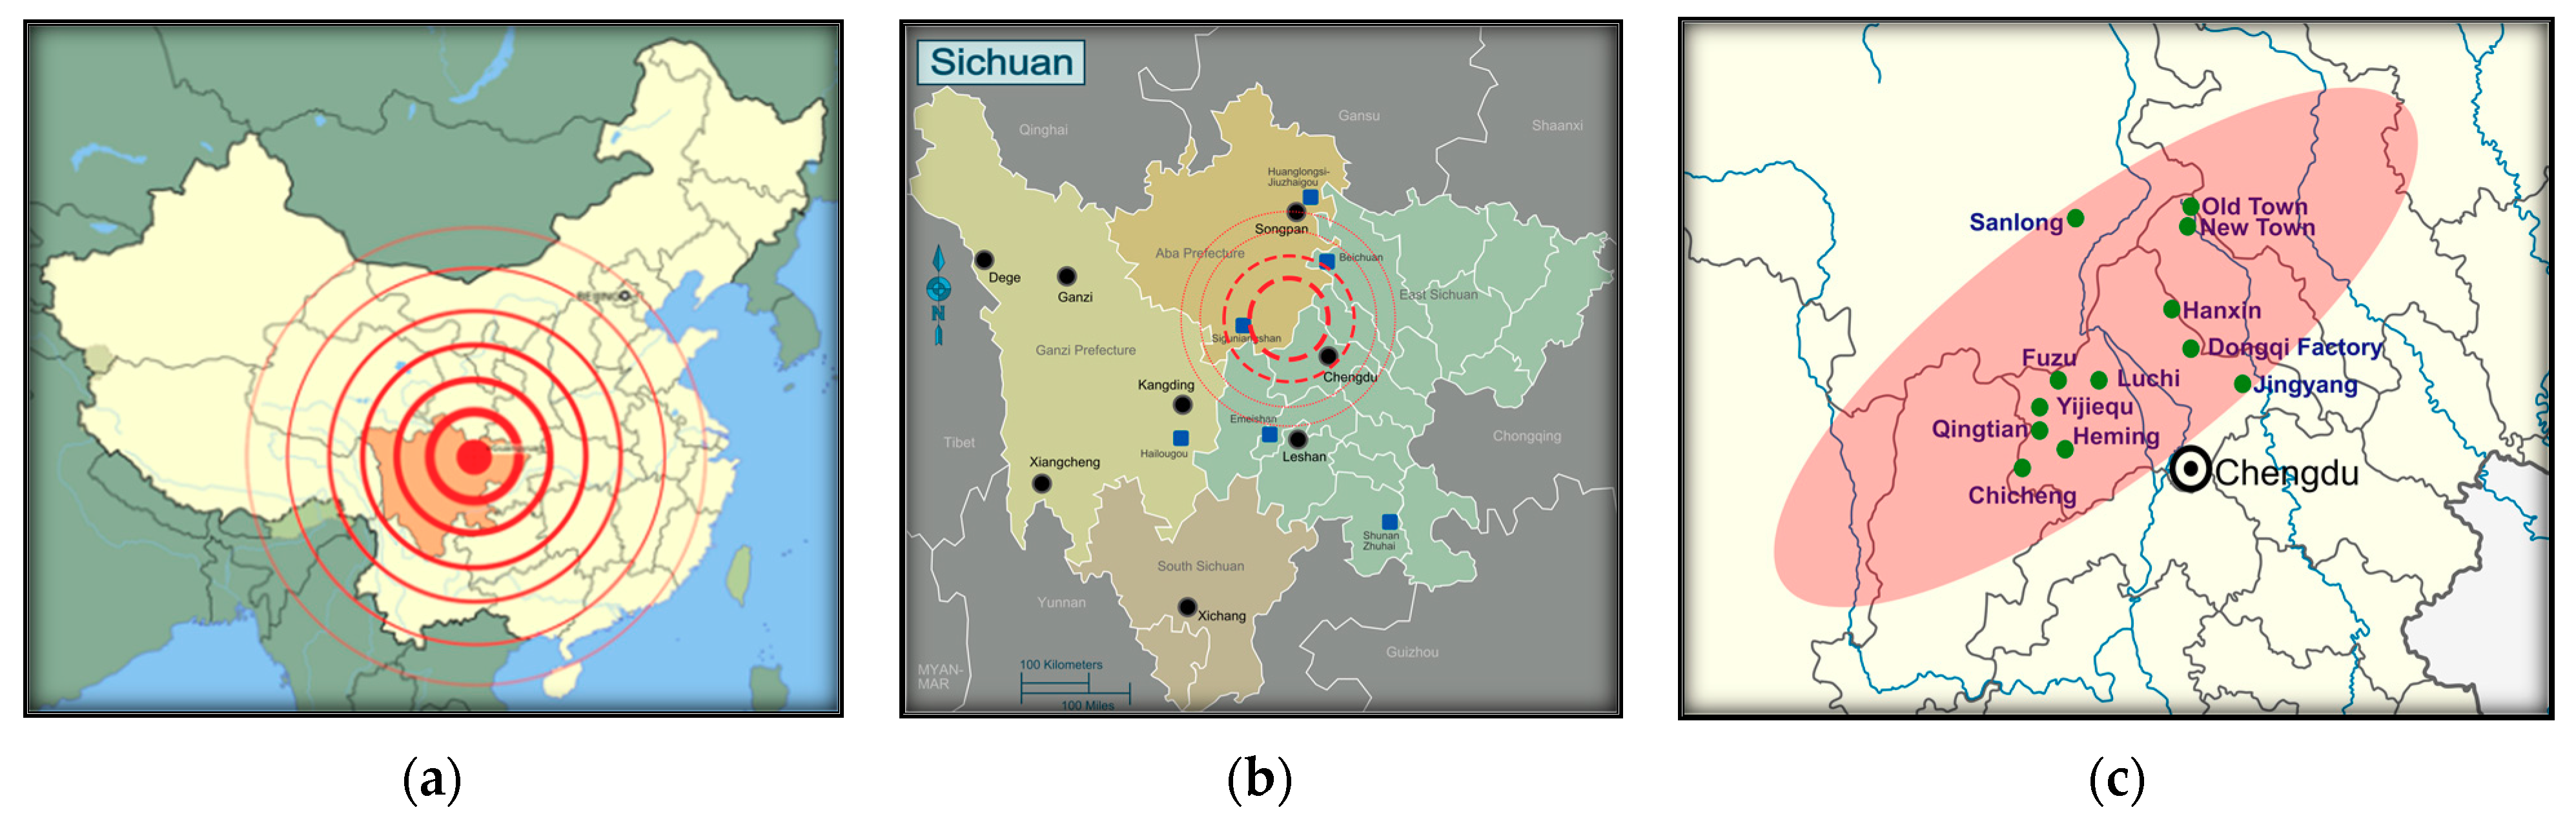 Sustainability Free Full Text When Housing And Communities Were Delivered A Case Study Of Post Wenchuan Earthquake Rural Reconstruction And Recovery Html